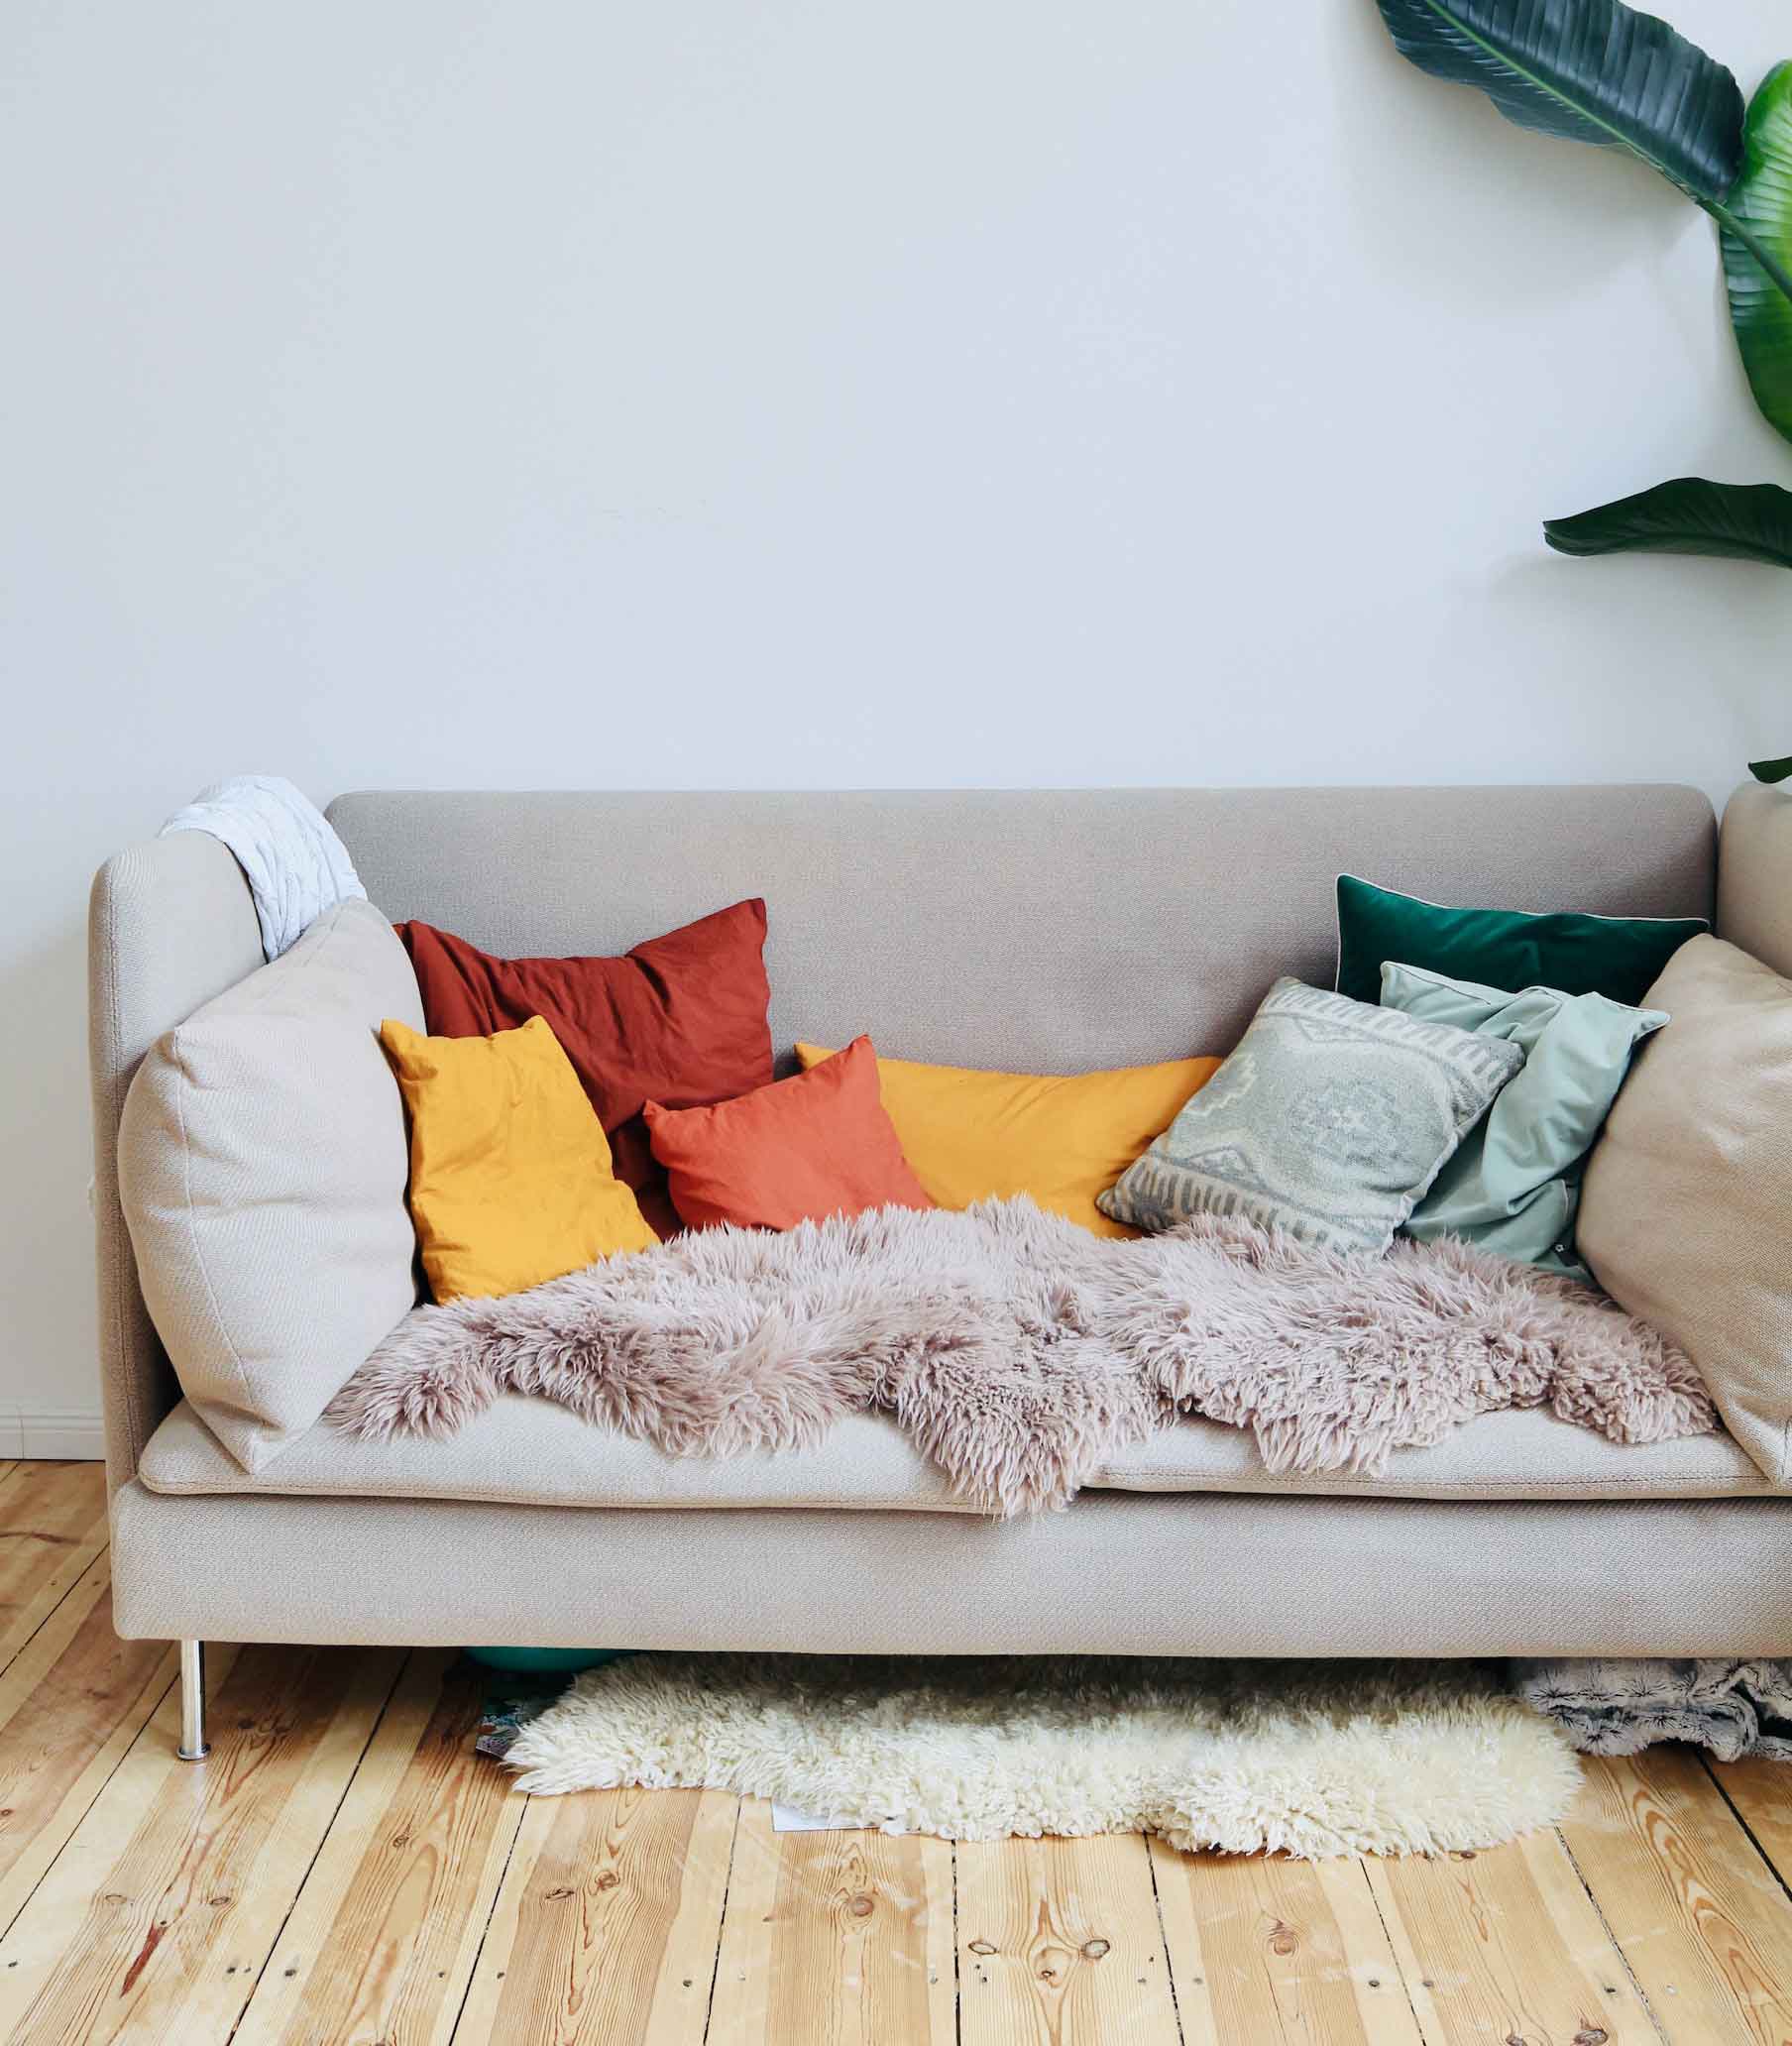 A light sofa with colorful pillows and a soft rug on it